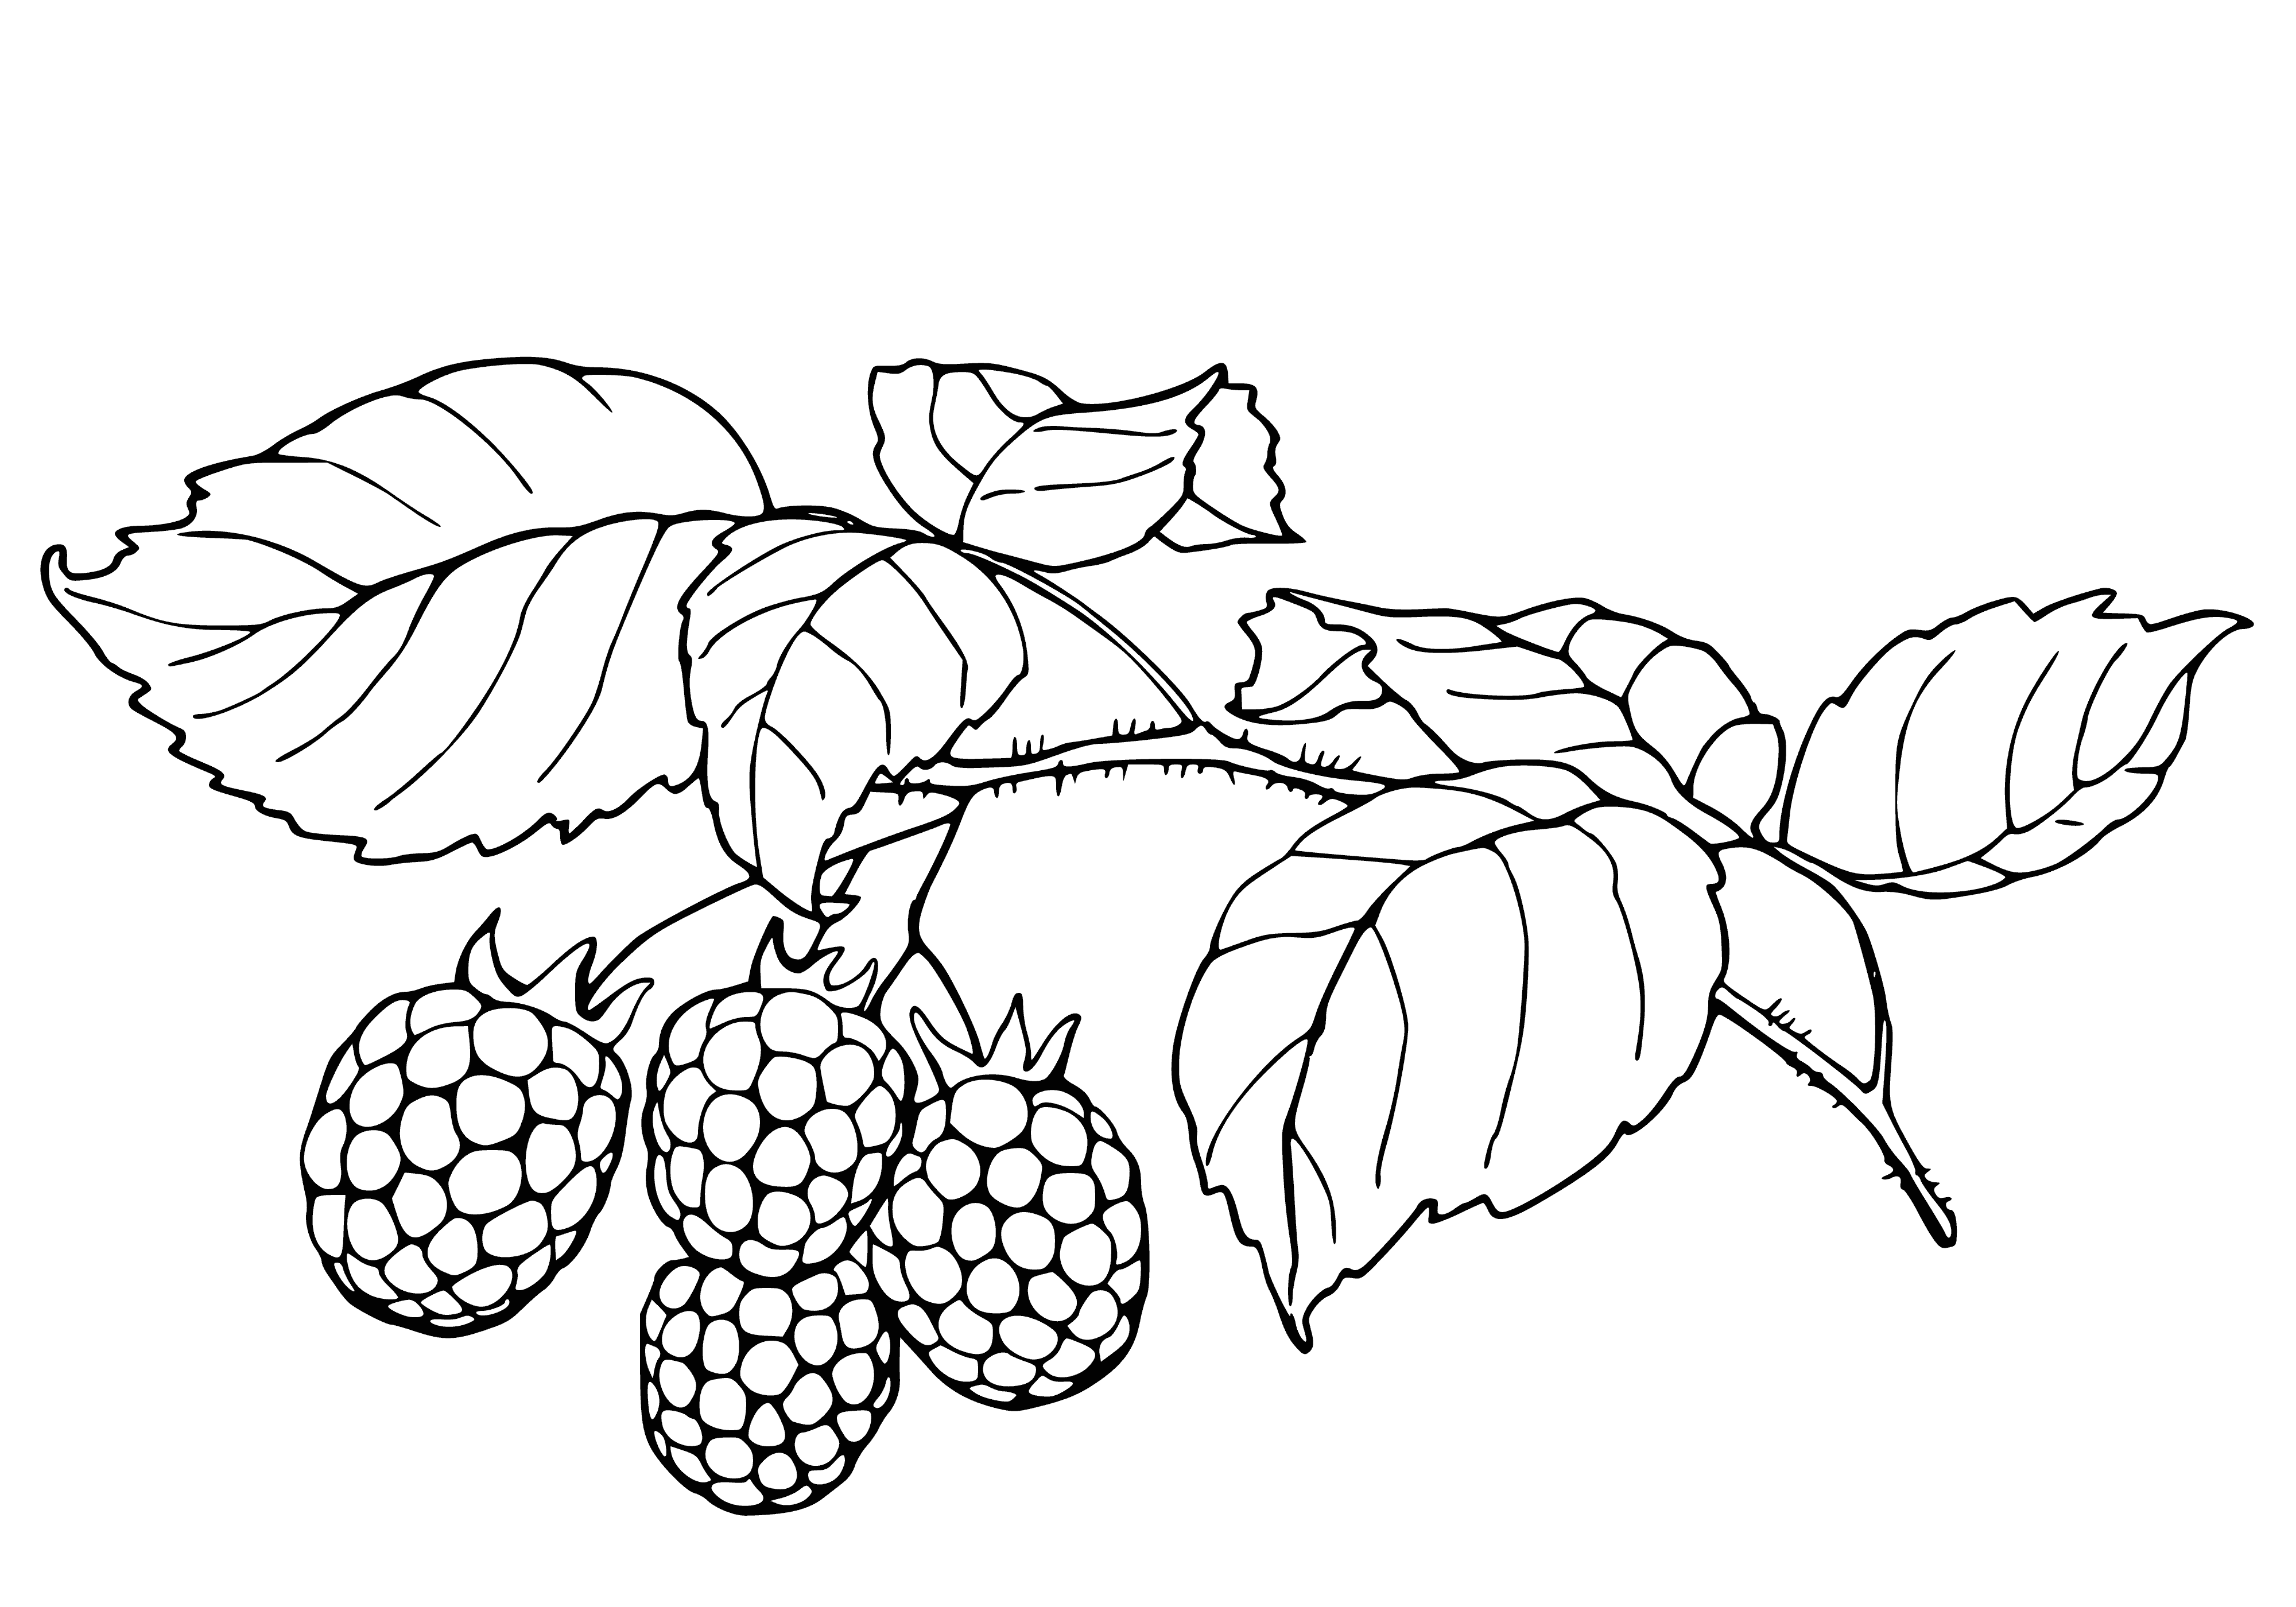 coloring page: Red raspberry bush grows berries w/ many small seeds, on leaves & thorns.